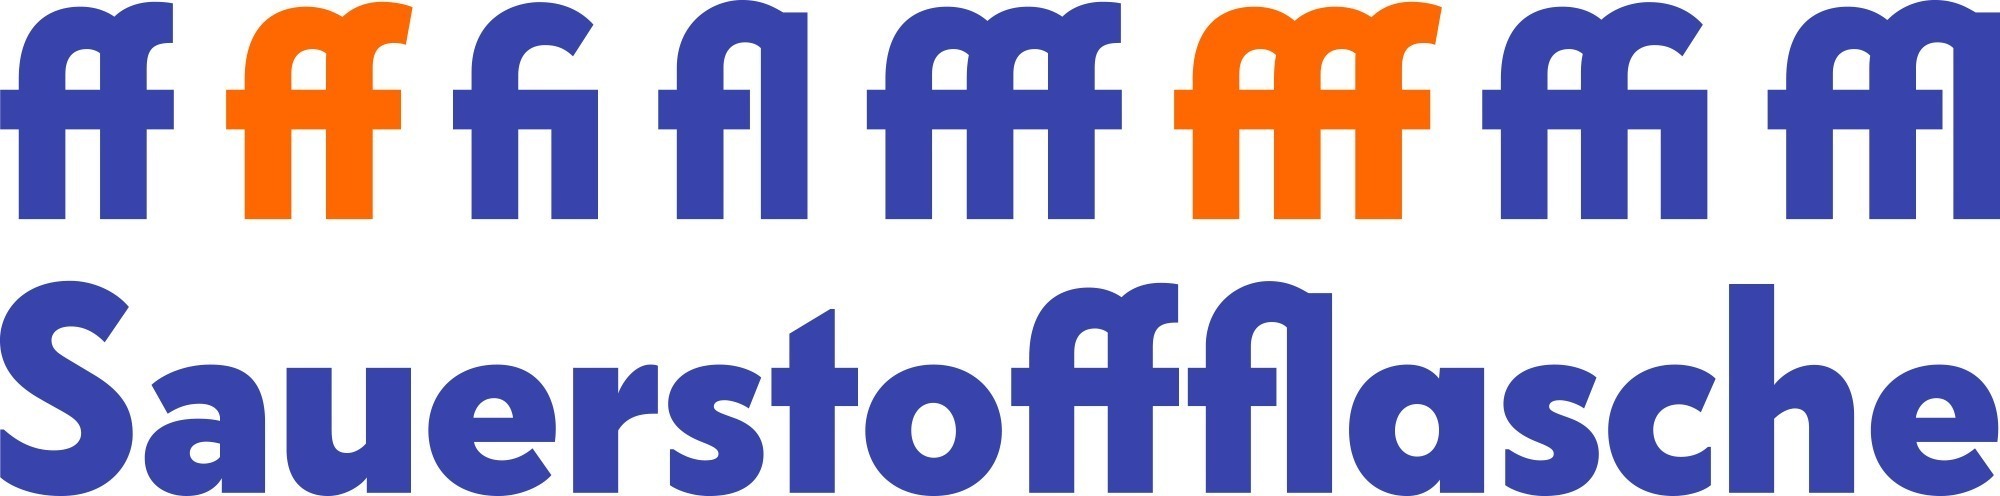 The FF Bauer Grotesk typeface features all ligatures in demand. Of course some of them have different sets of stroke endings. Unfortunately the ‘fff’-ligature cannot be used in German words such as Sauerstoffflasche or Schifffahrt—that would be considered a typo. 